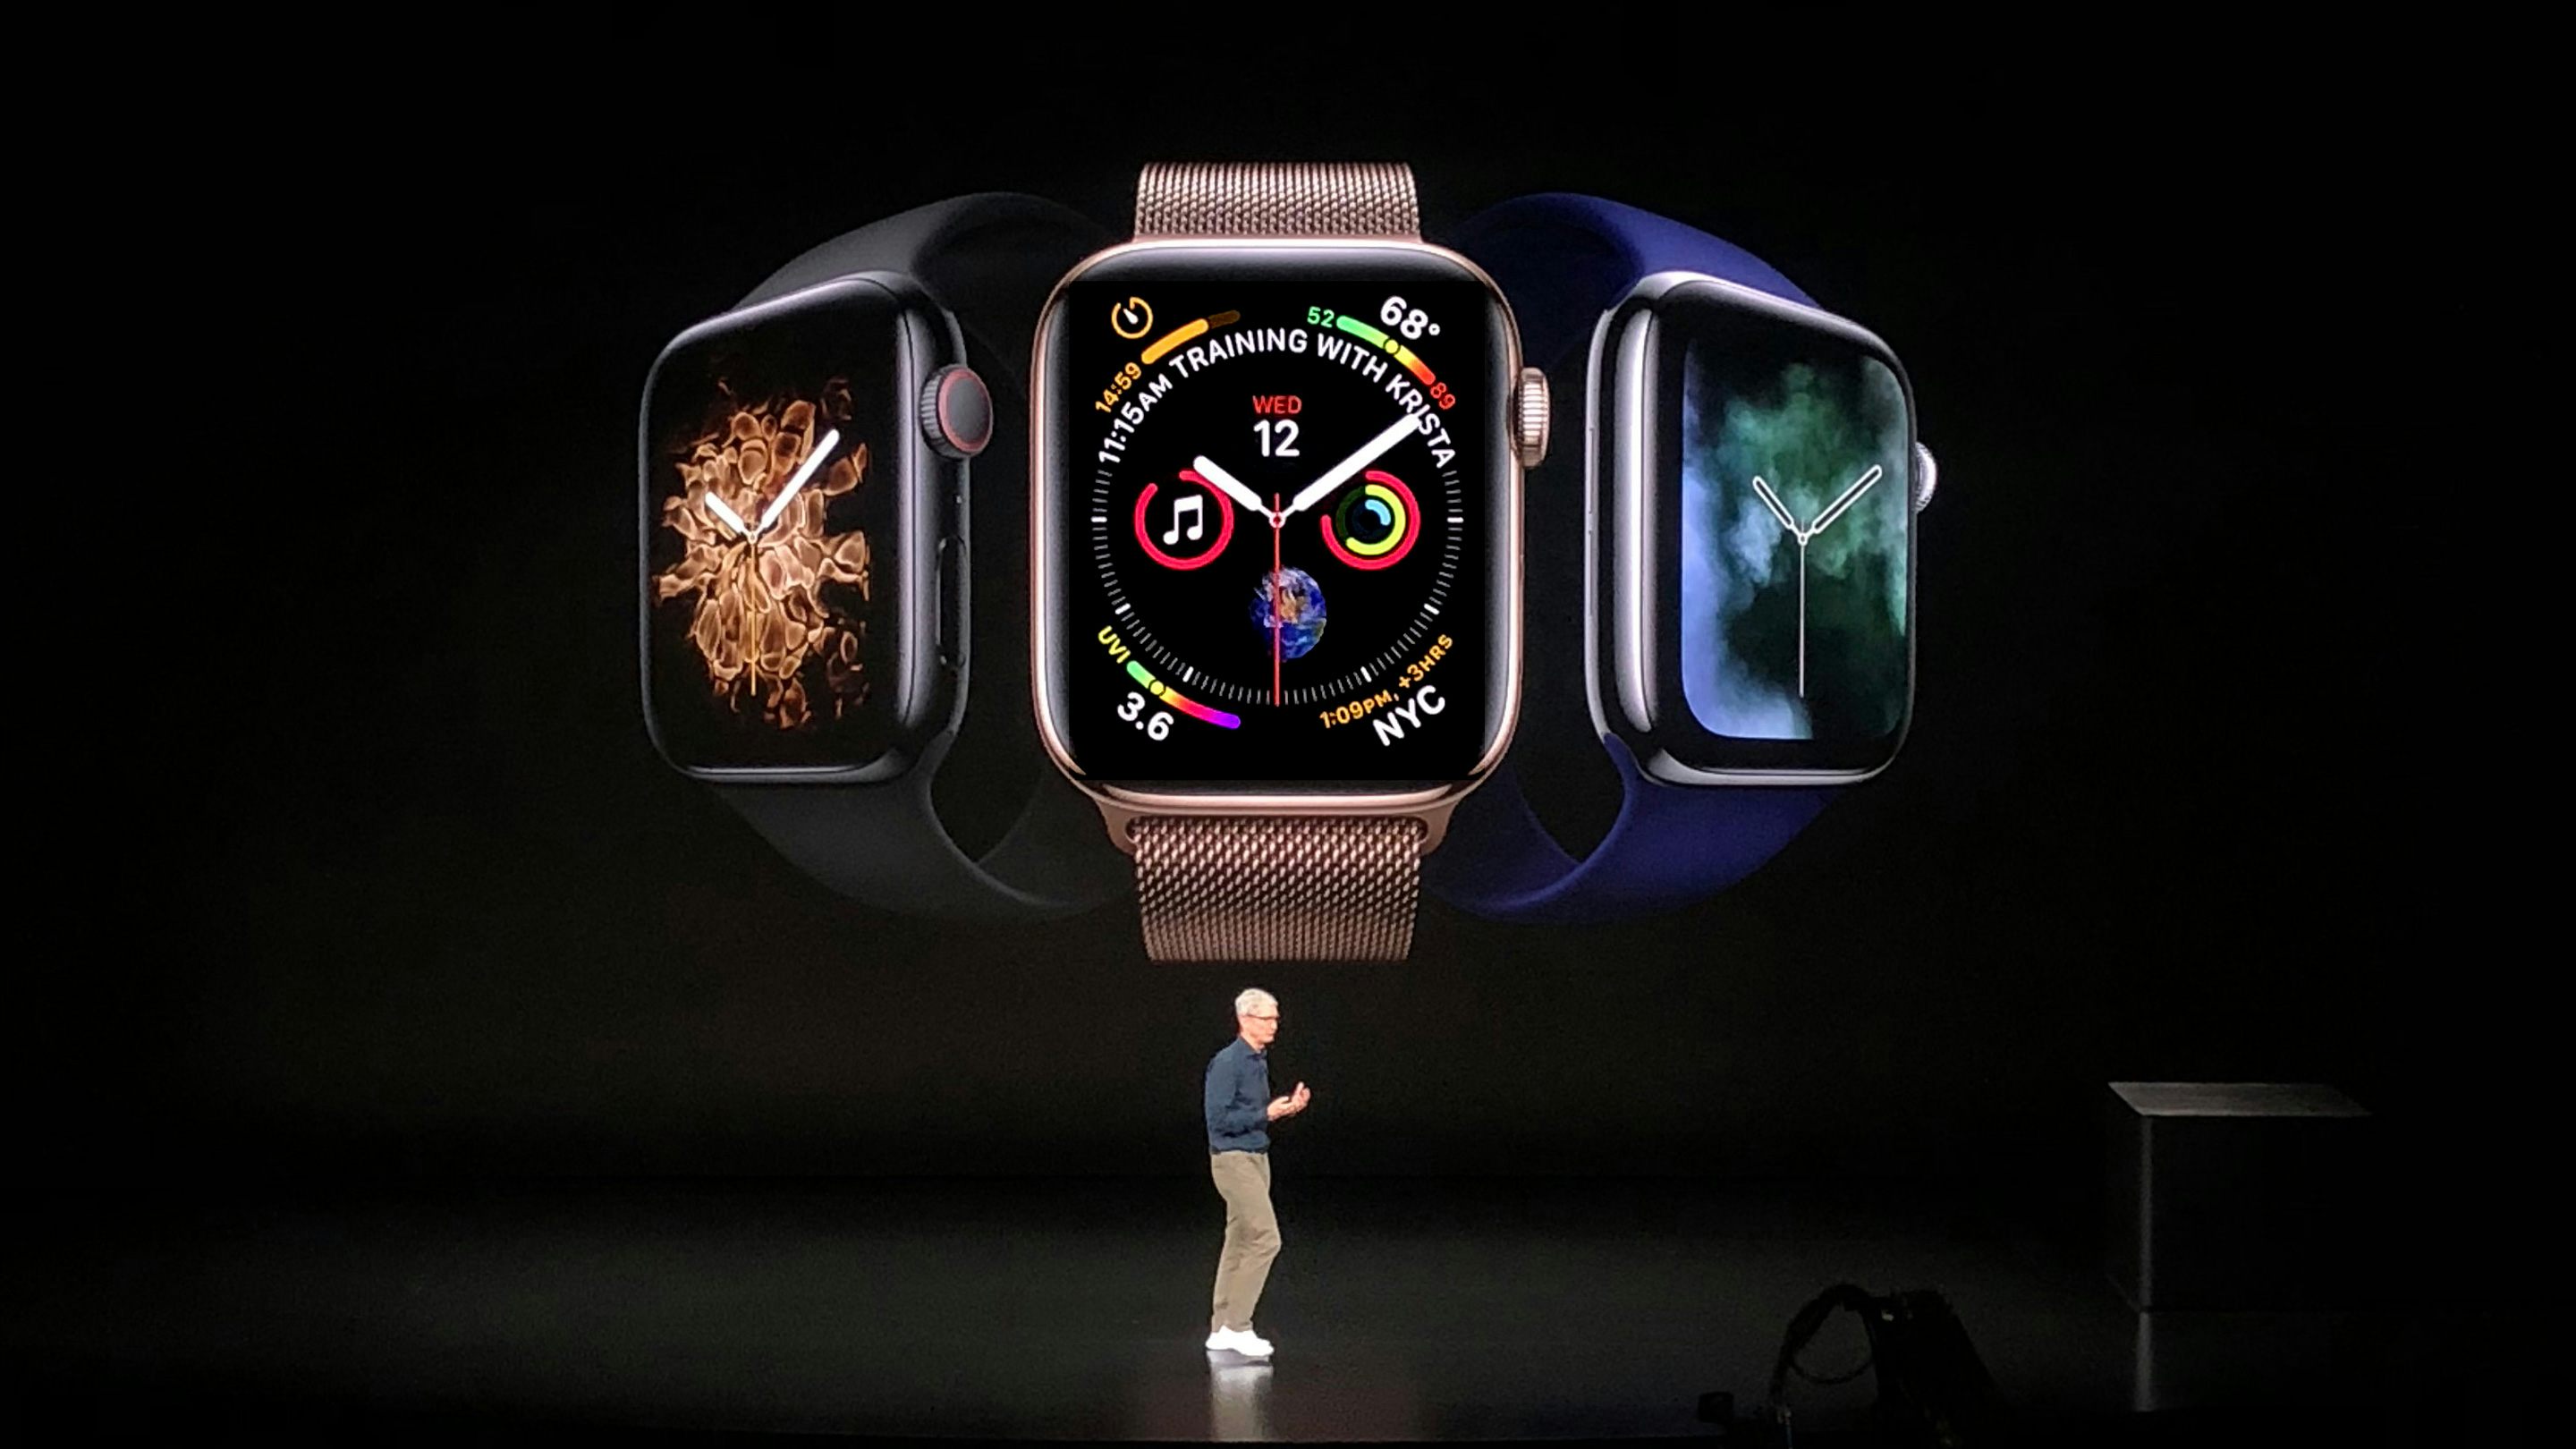 An In-Depth HODINKEE Look At The Apple Watch Series 7